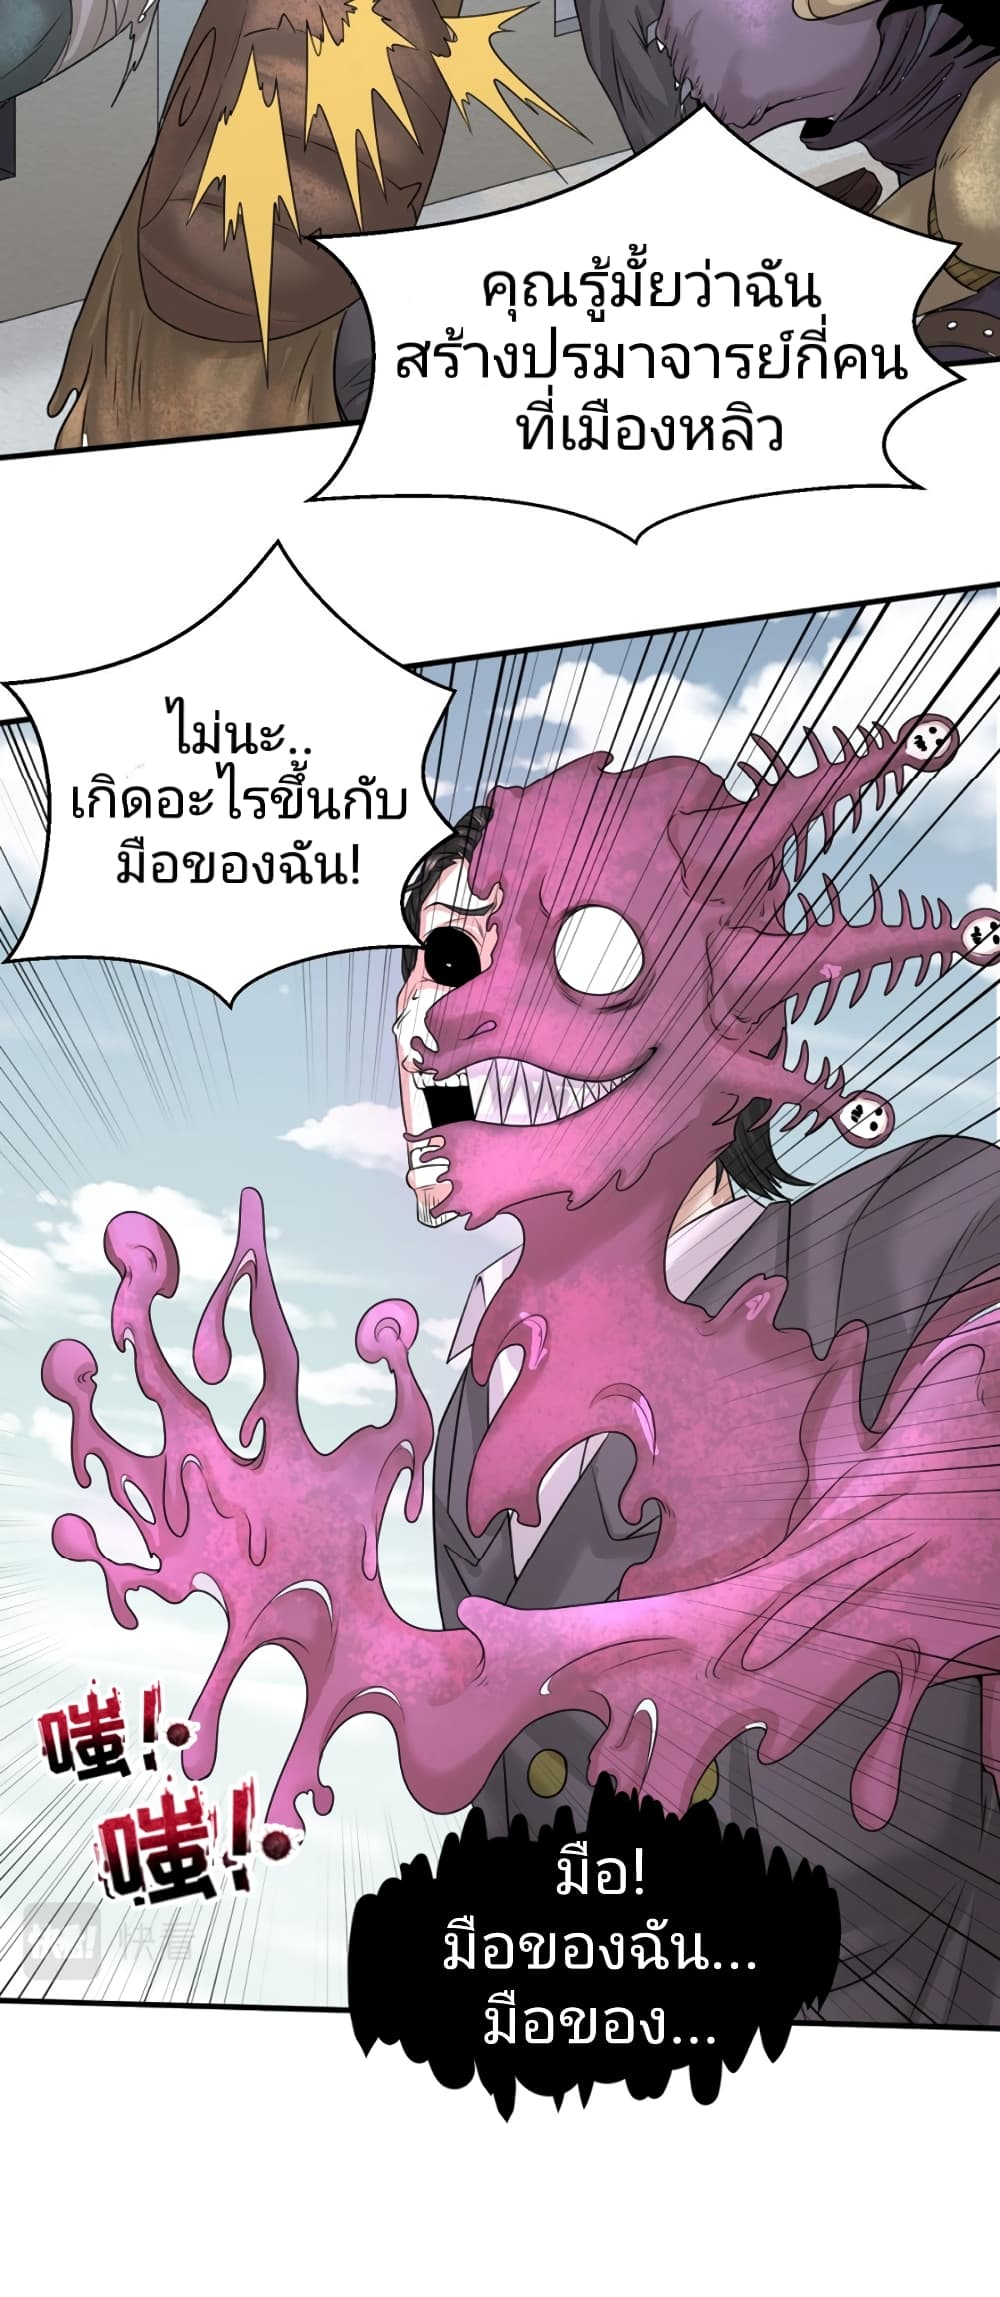 The Age of Ghost Spirits à¸à¸­à¸à¸à¸µà¹ 34 (13)